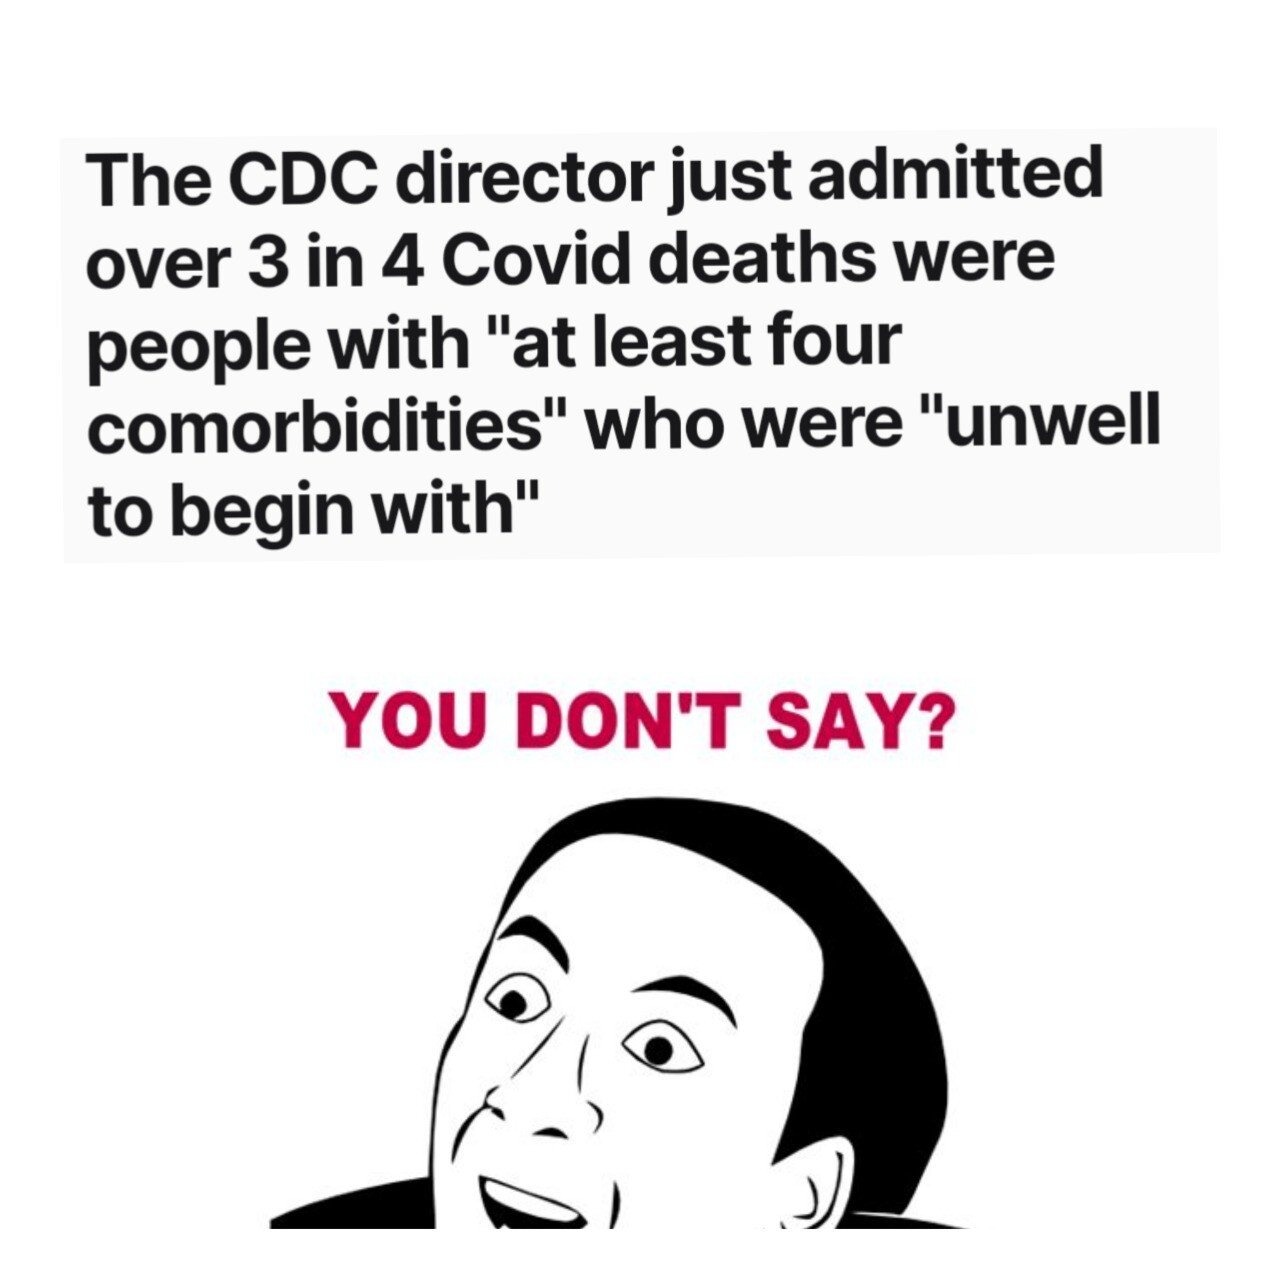 The CDC director just admitted 3 in 4 COVID deaths were people who were ...